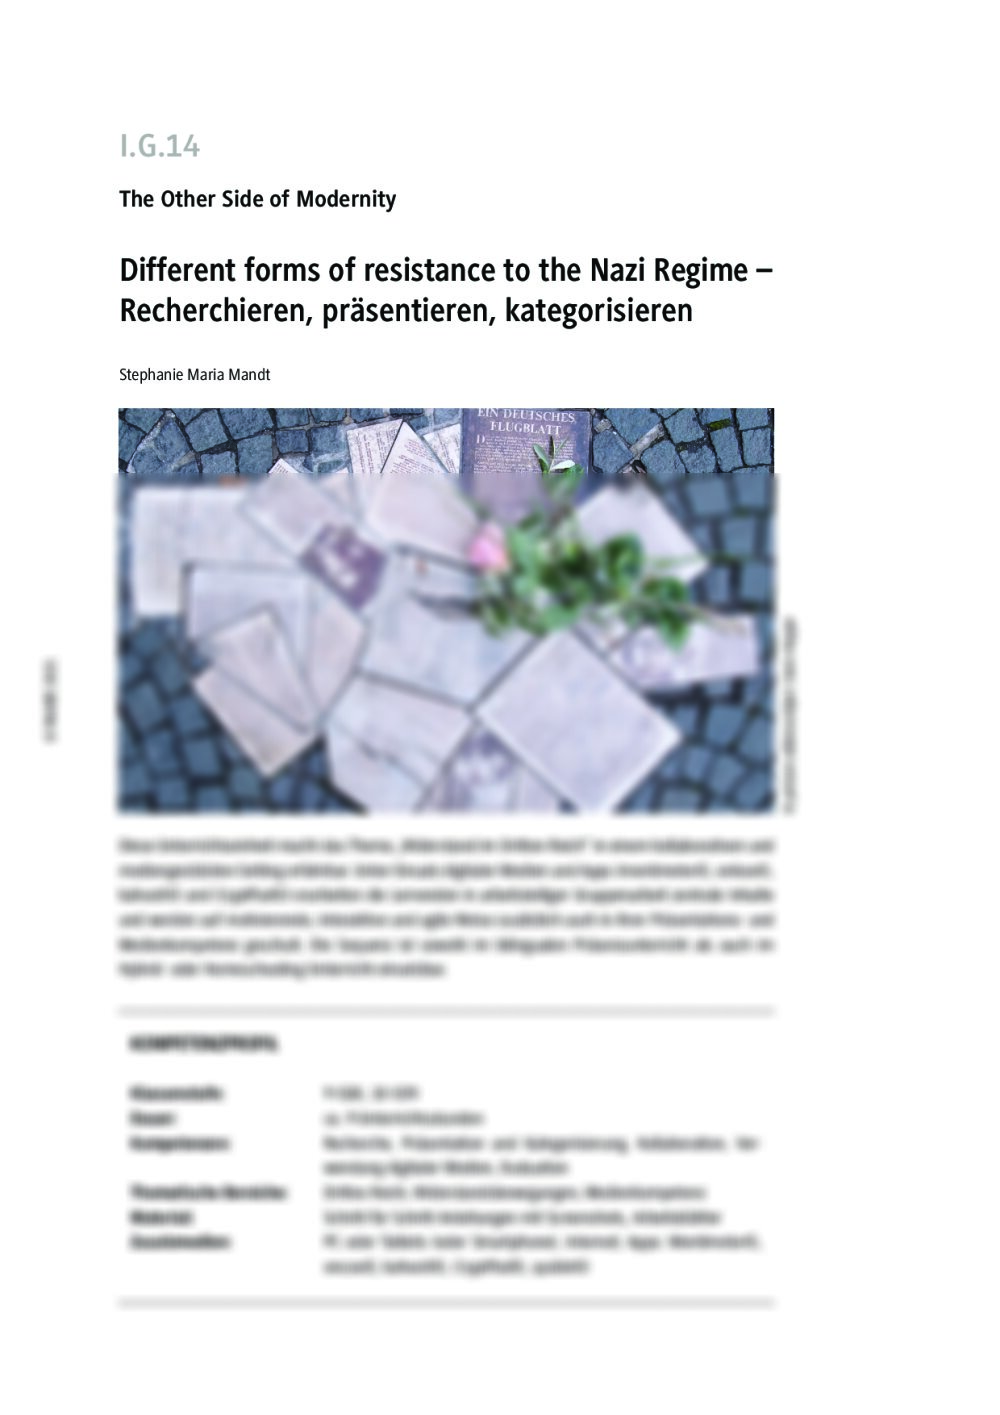 Different forms of resistance to the Nazi Regime - Seite 1